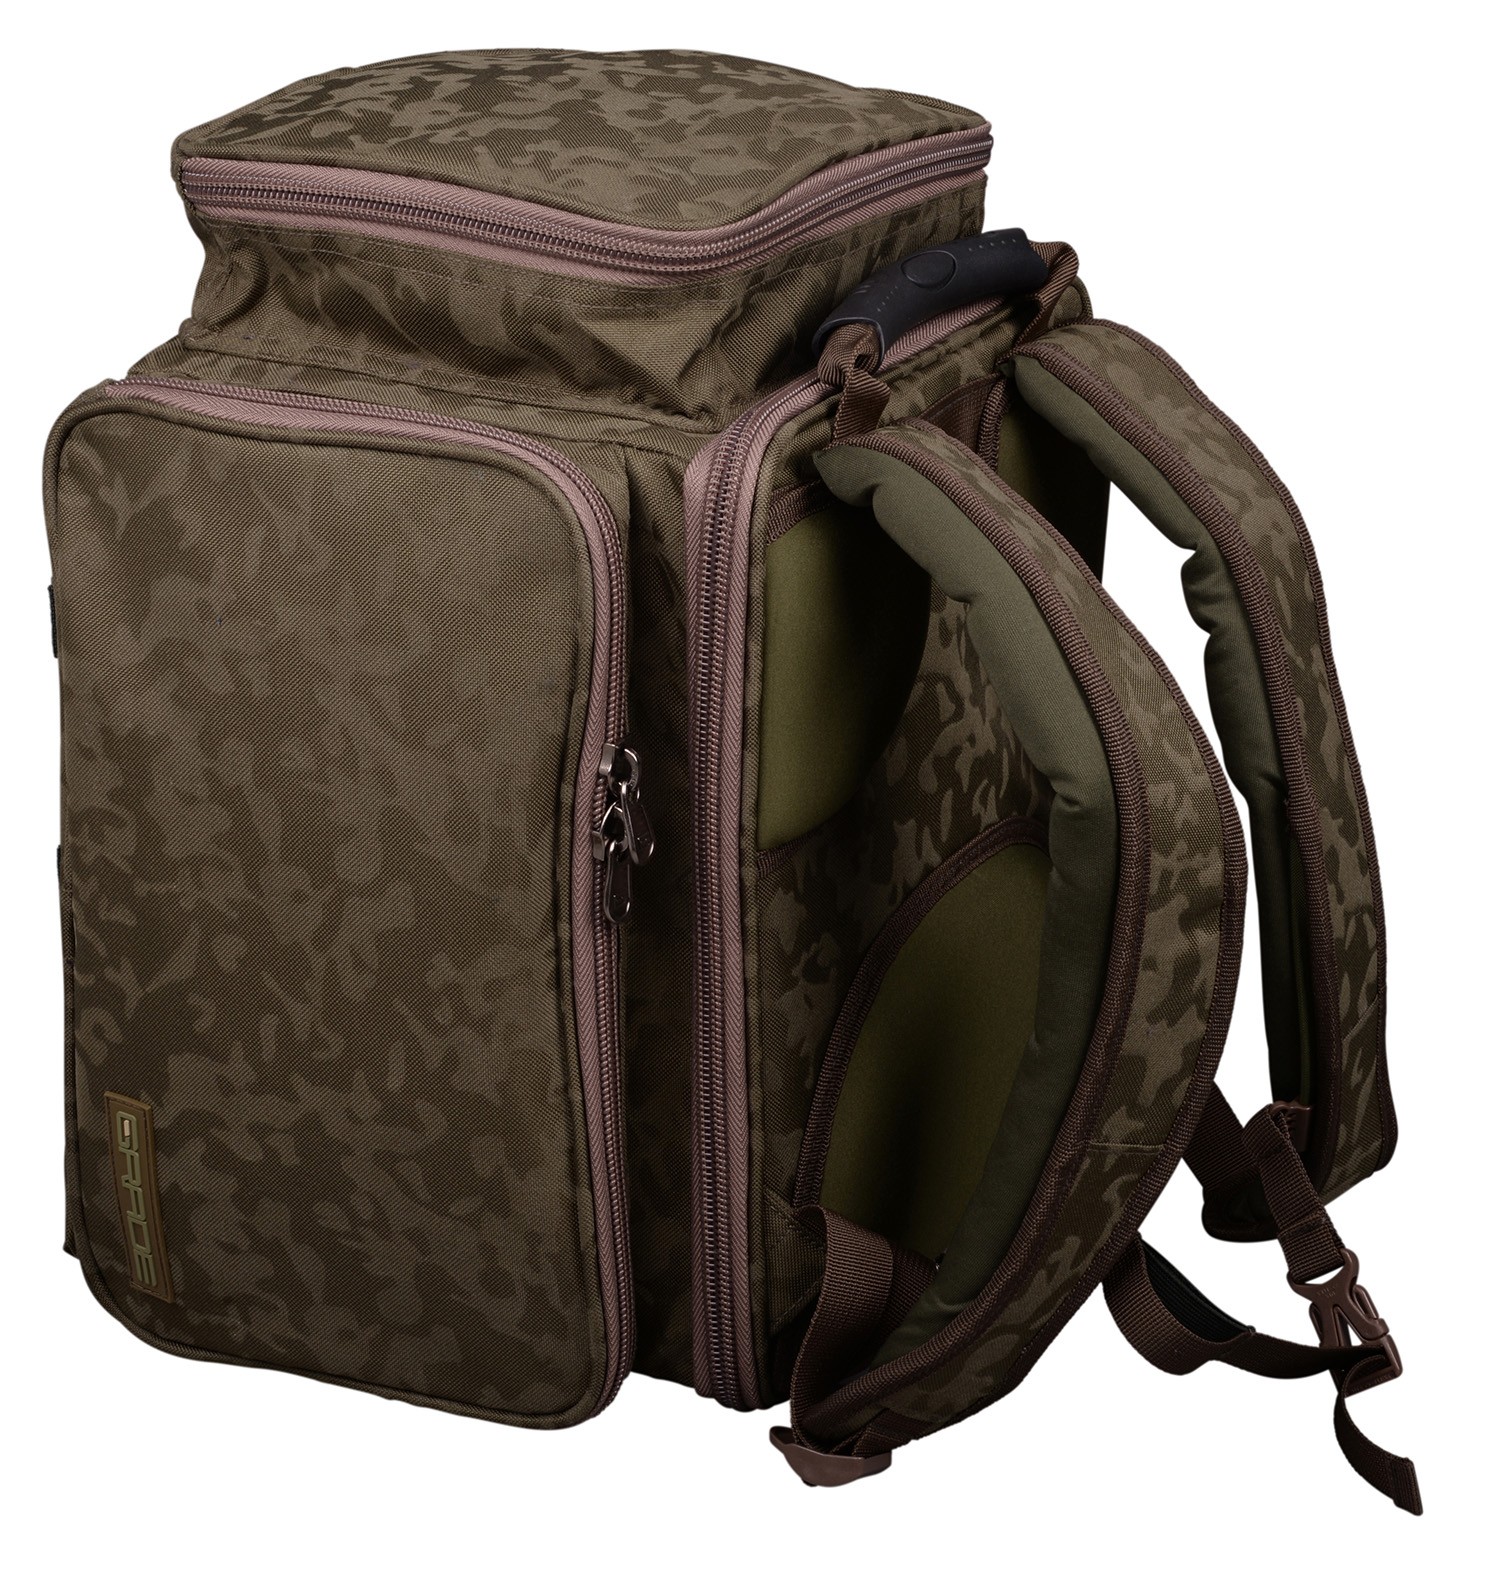 Grade Compact Backpack